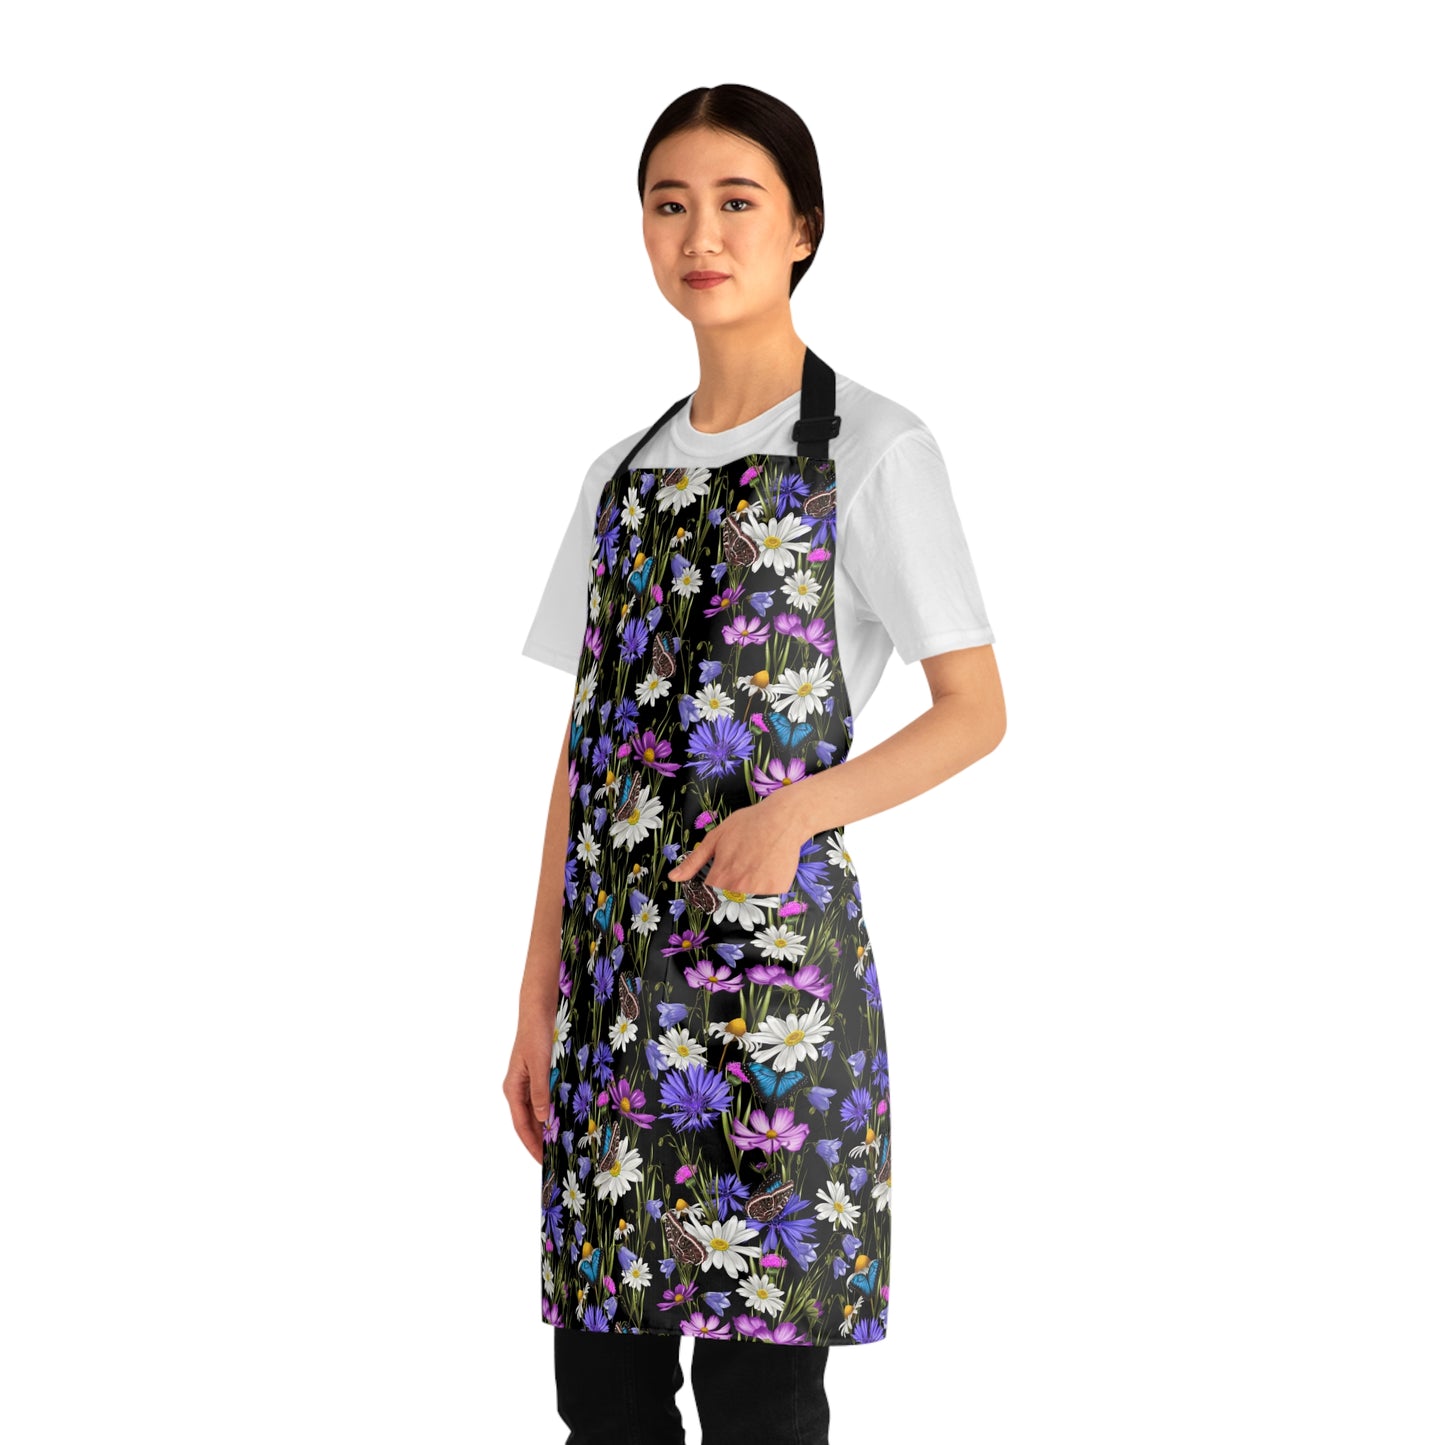 Purple and white wildflowers Apron with cute butterflies. Mothers Day gift for garden lover or grandma